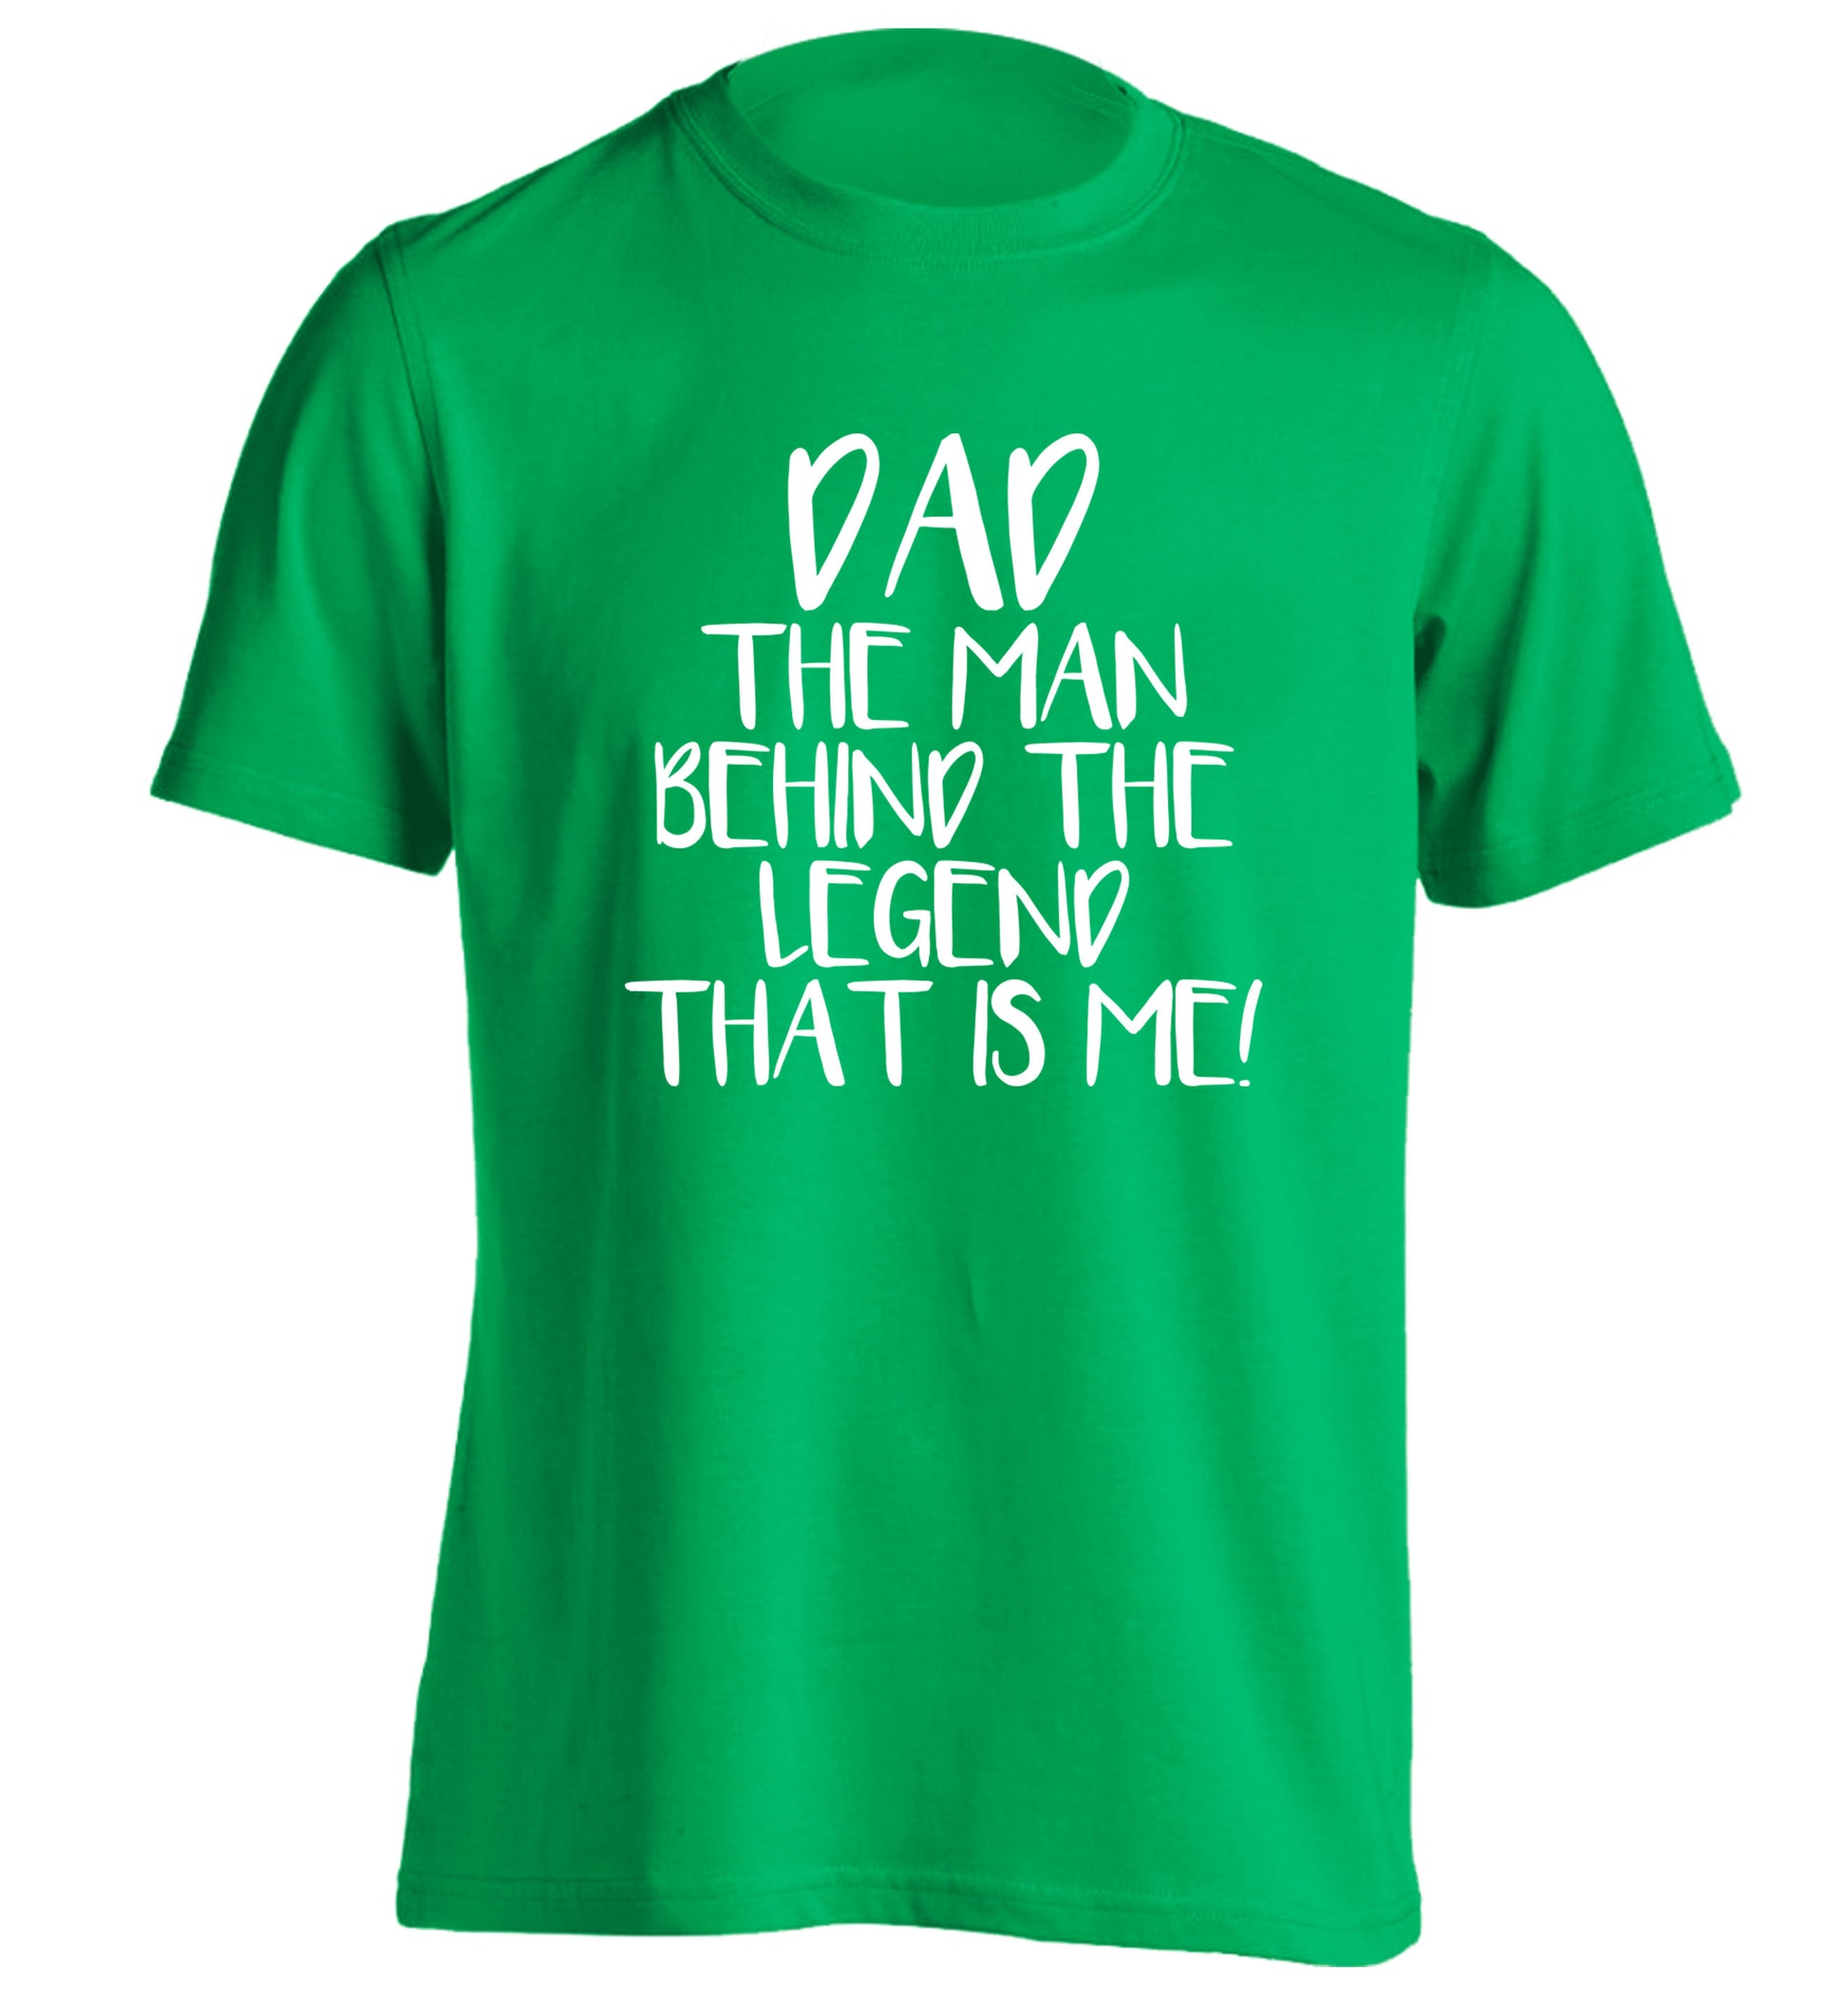 Dad the man behind the legend that is me! adults unisex green Tshirt 2XL